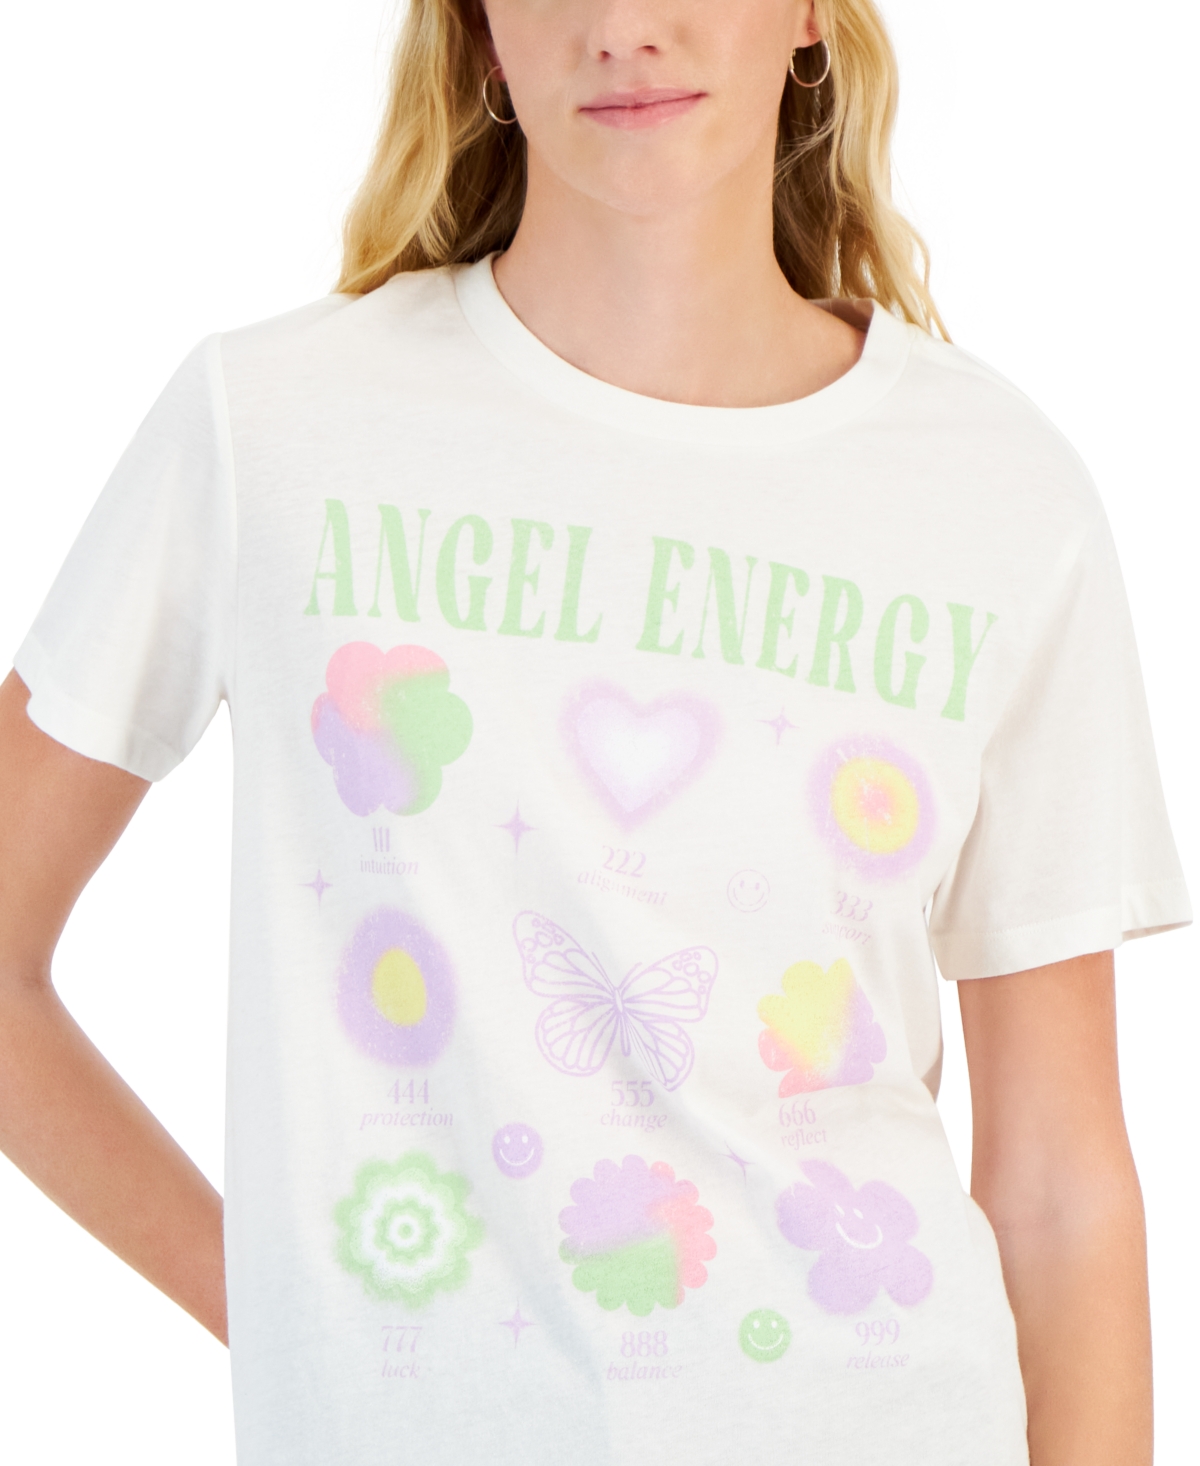 Shop Grayson Threads, The Label Juniors' Angel Energy Graphic Tee In Off White